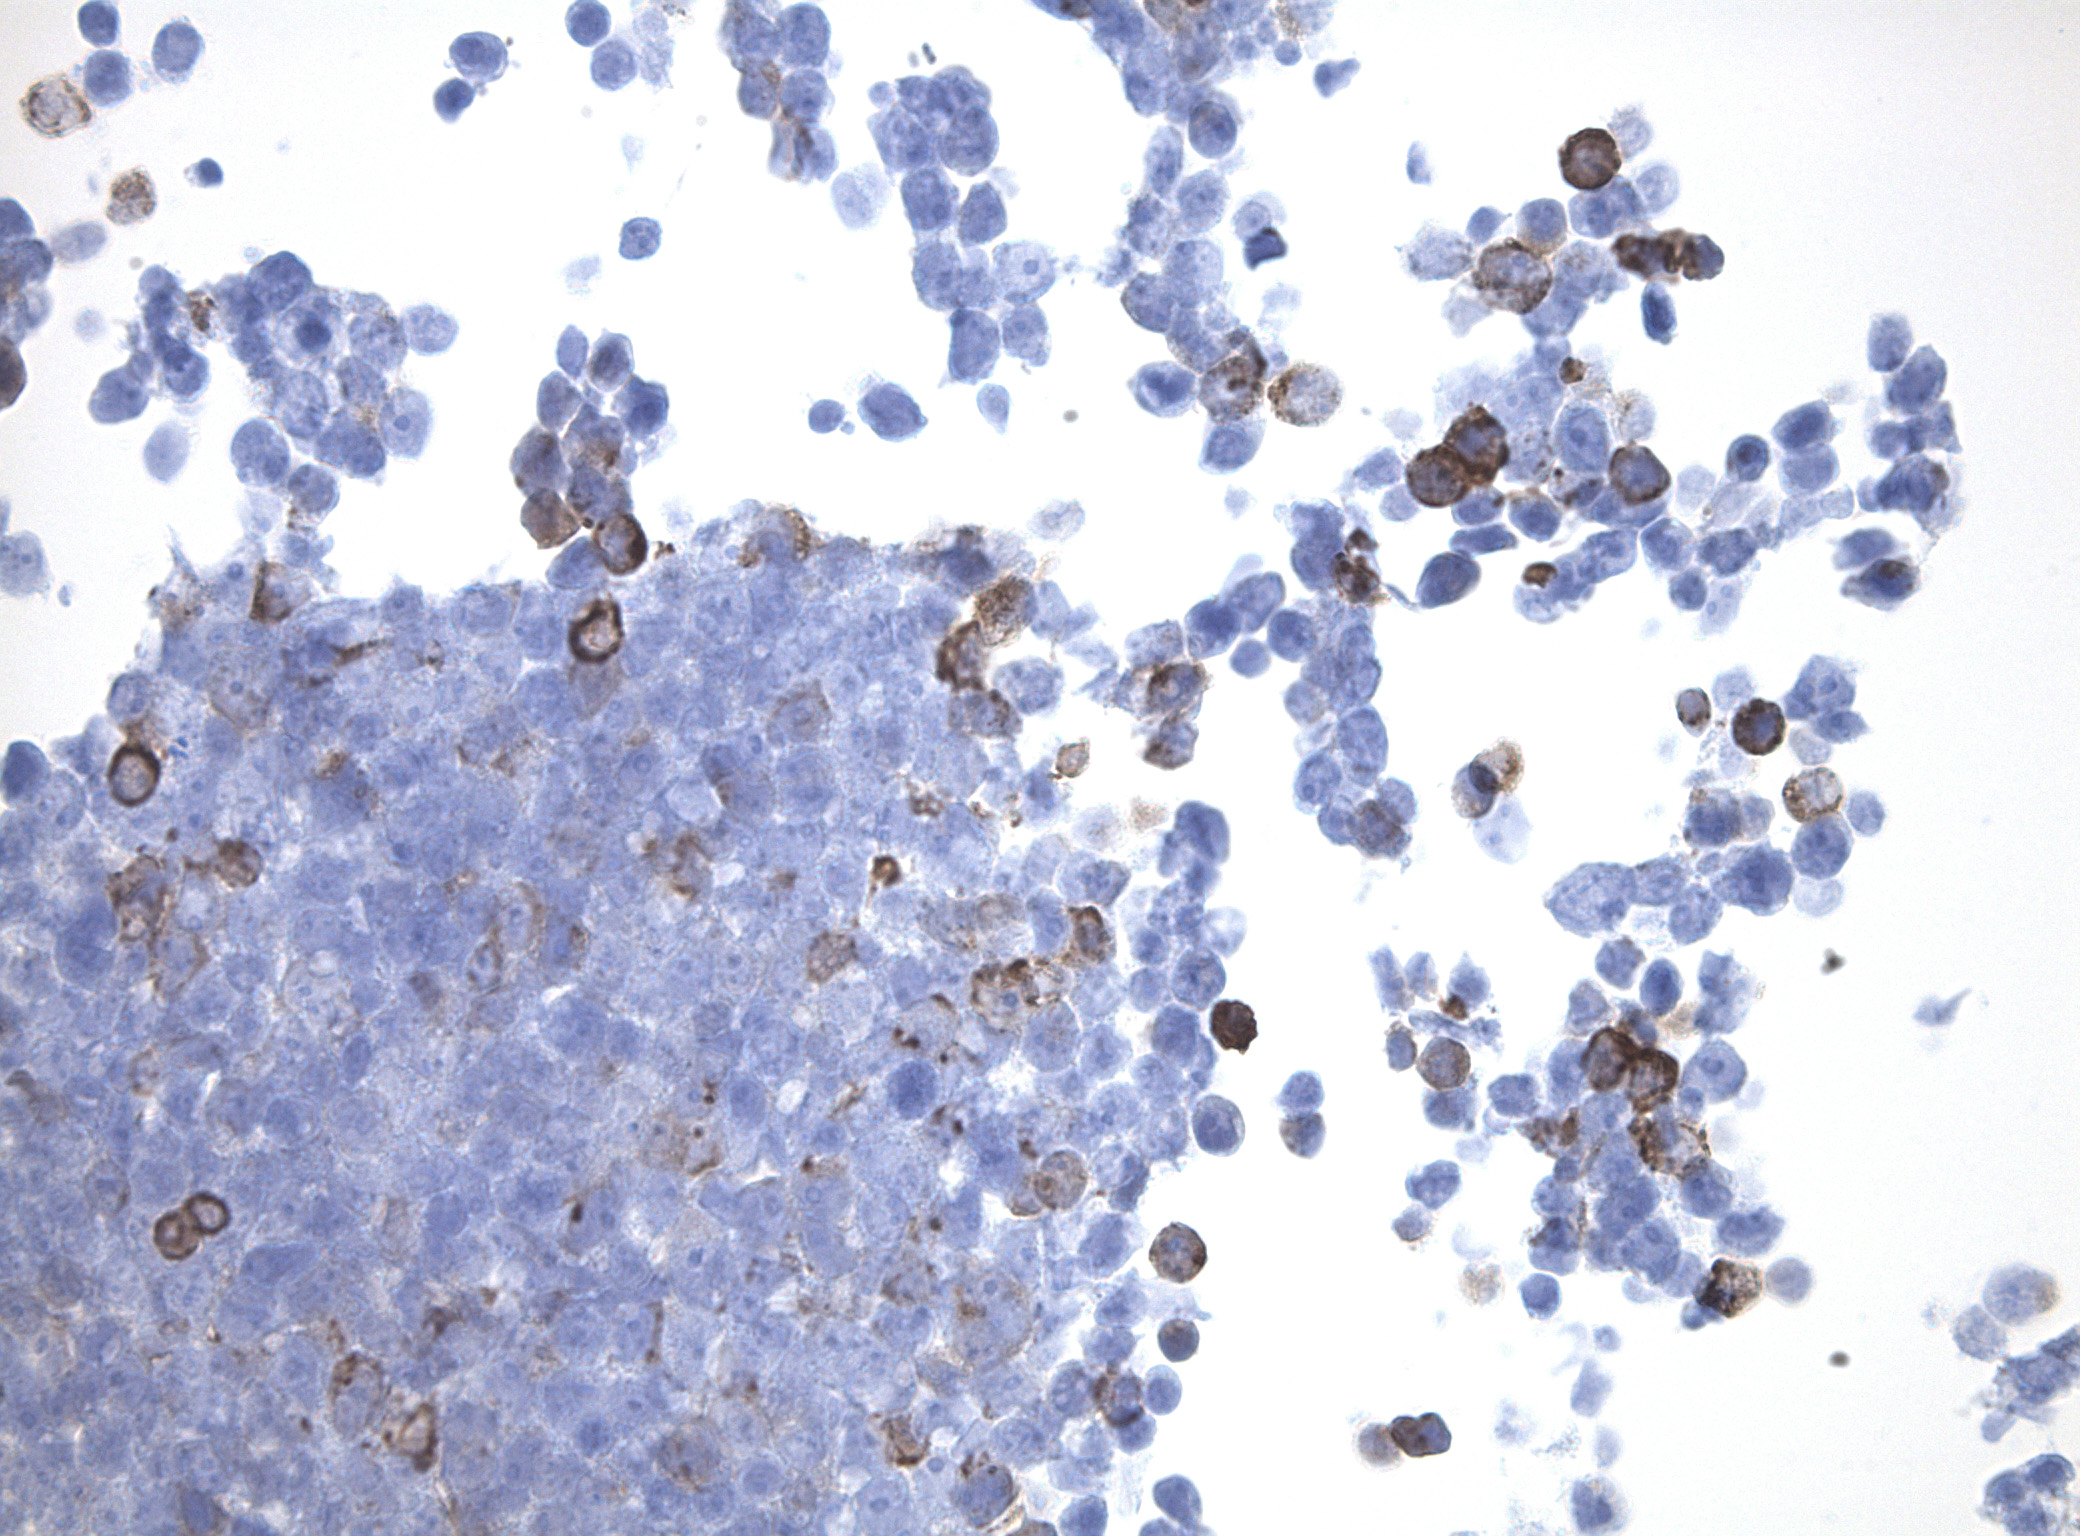 Immunohistology staining on COL10A1 overexpressed cytosection TS411658P5 with rabbit anti DDK clone OTIR5G2 C/N TA592569 at 1:2000 dilution 20m RT. Antibody staining was achieved with HIER Citrate pH6 , Polink1 with DAB chromogen detection kit (D11-18). Positive stain shown with the brown chromogen present. HEK293T cells were transfected with cDNA clone RC211658, 5 micron sections, 40x magnification